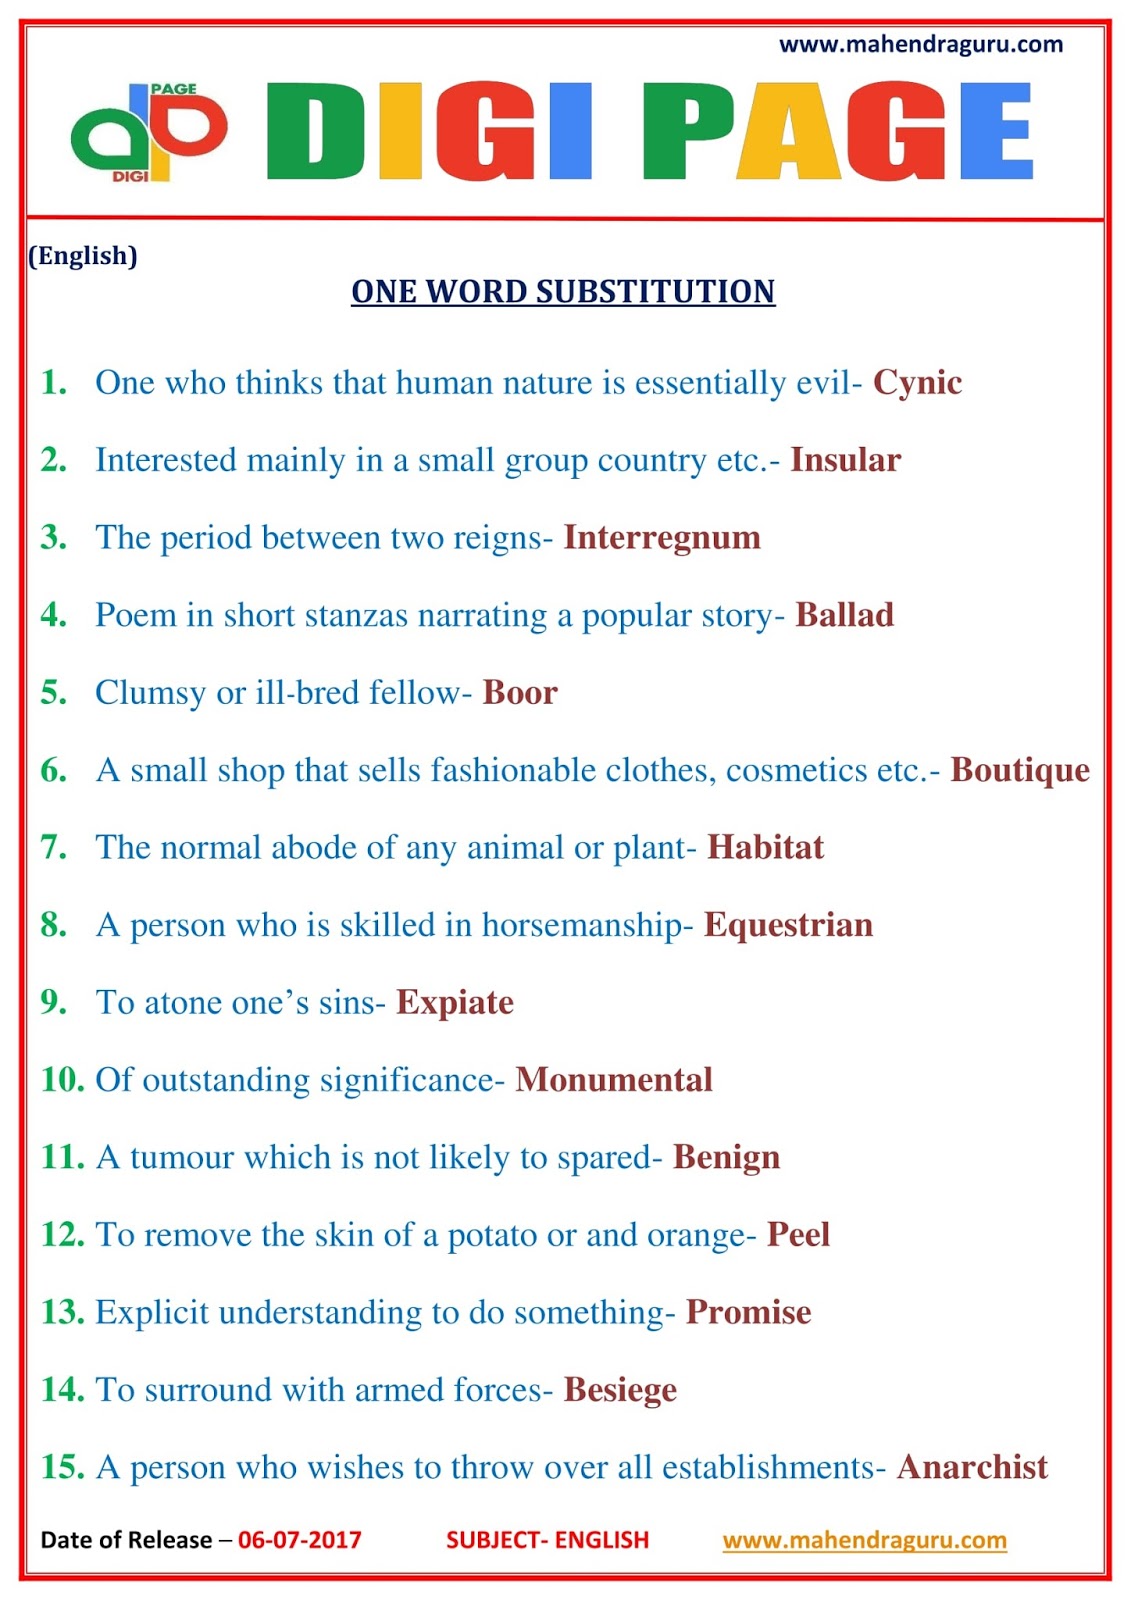 dp-one-word-substitution-06-july-17